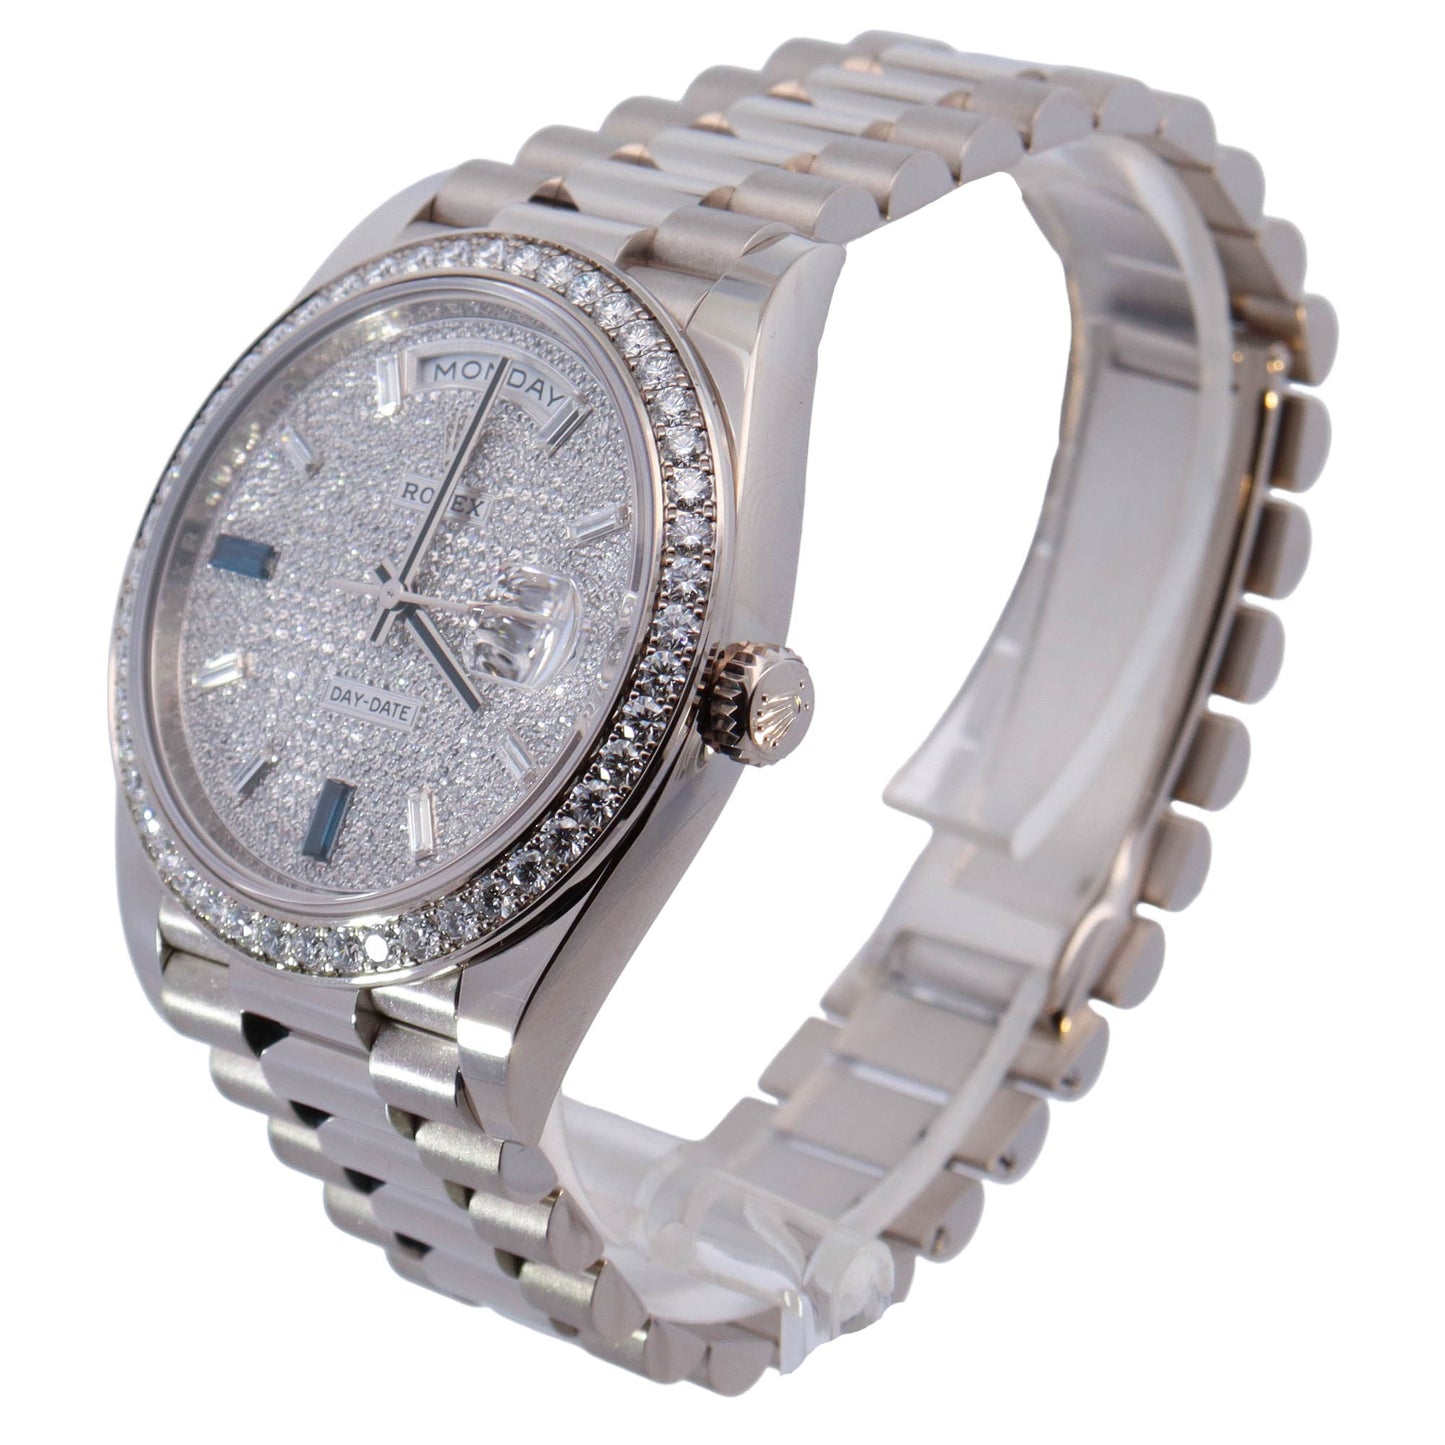 Rolex Day-Date White Gold 40mm Factory Diamond Bezel Pave Sapphire Dial Watch Reference# 228349RBR